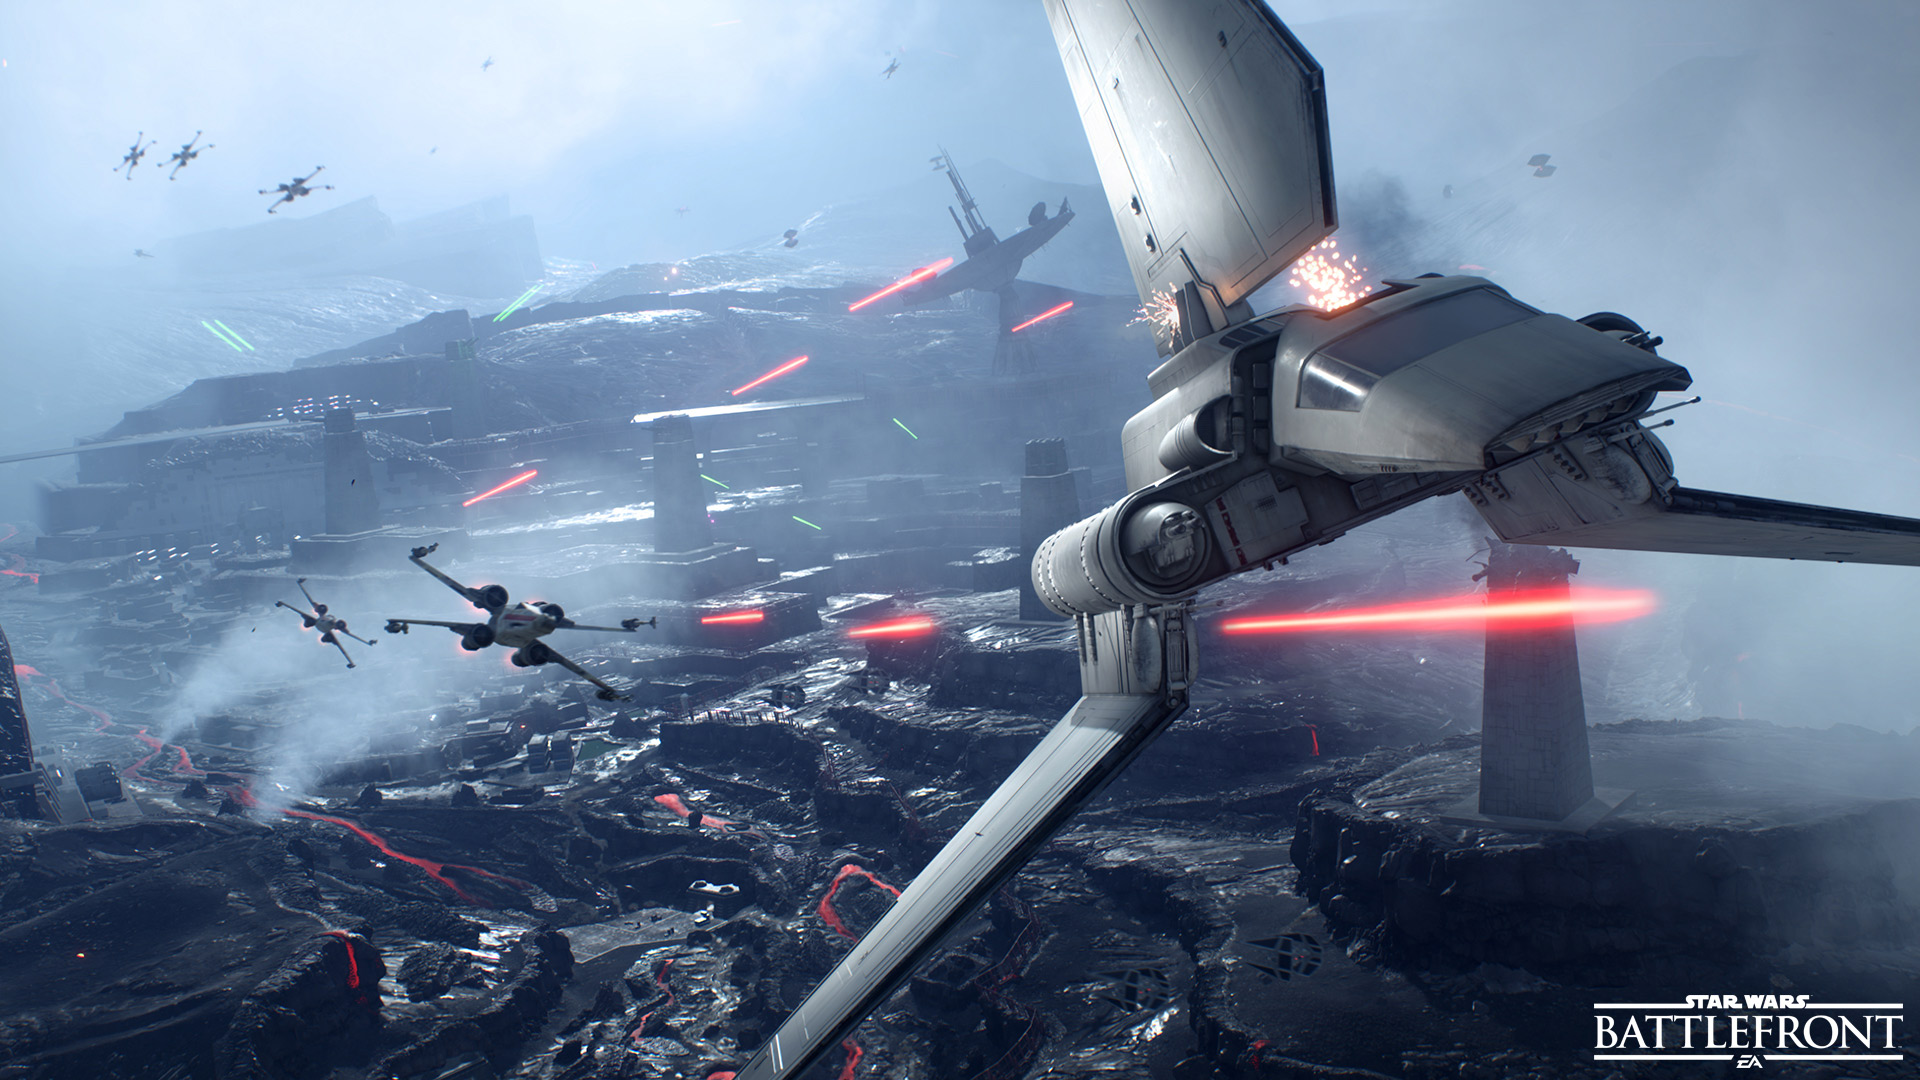 Star Wars Battlefront Forum That Everyone Can Call Home By Starwars